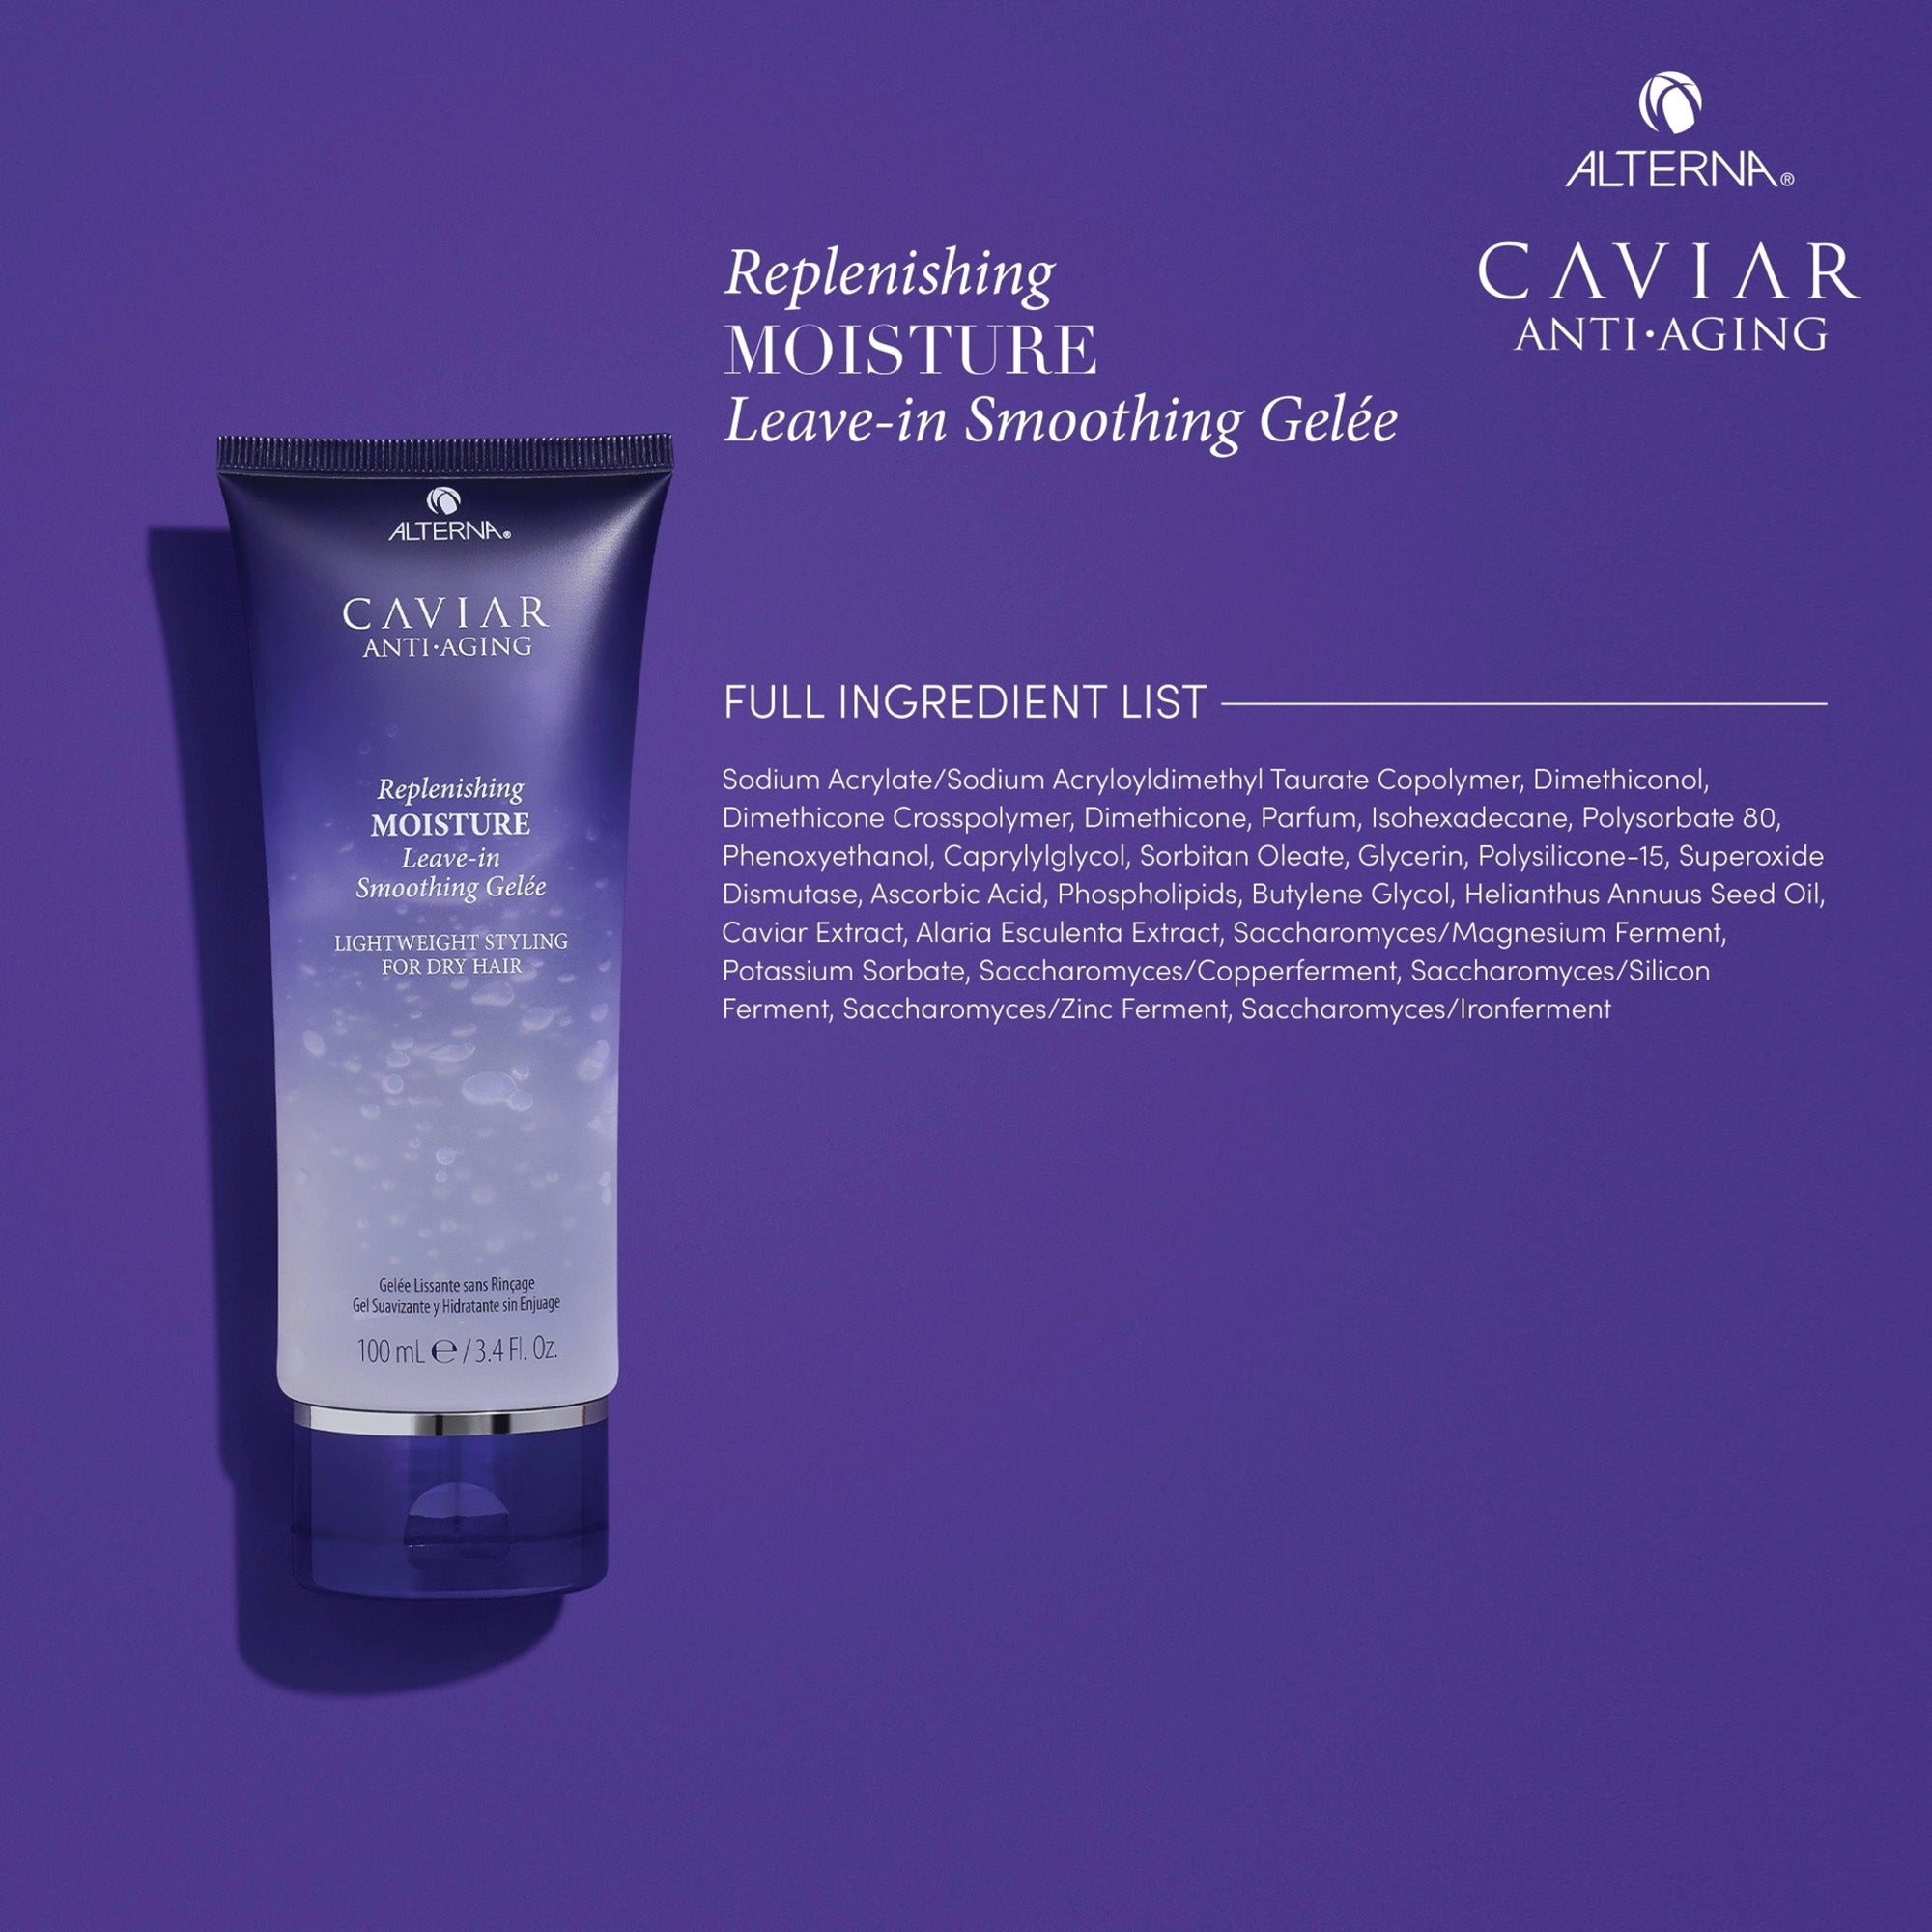 Alterna Caviar Anti-Aging Replenishing Moisture Leave-In Smoothing Gelee / 3.4OZ